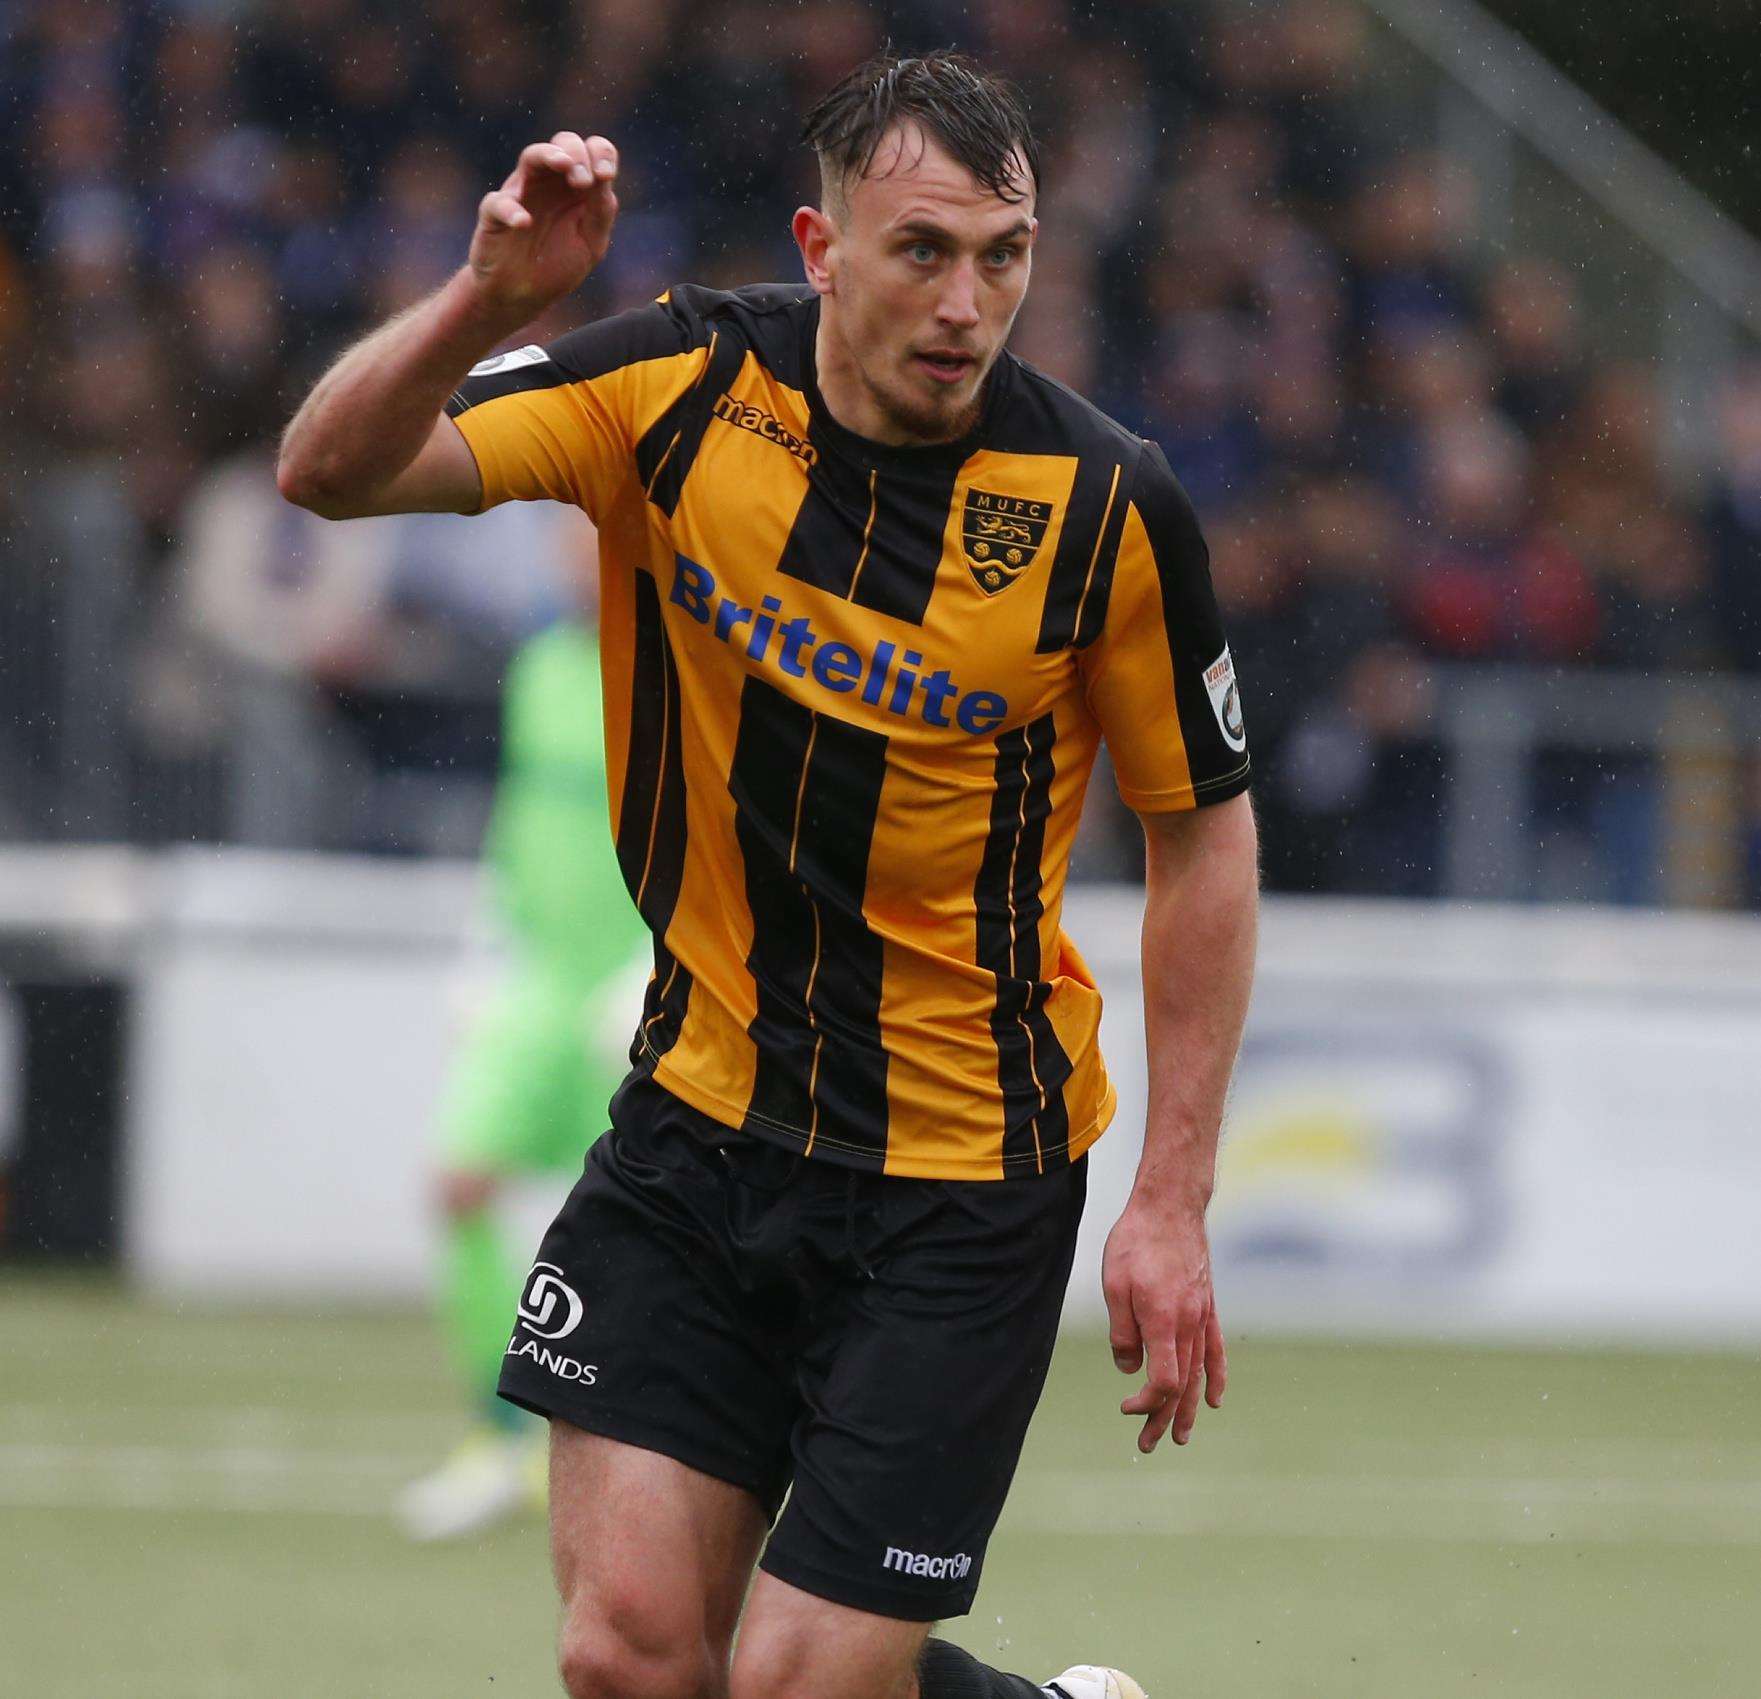 Will De Havilland in action for Maidstone United Picture: Andy Jones